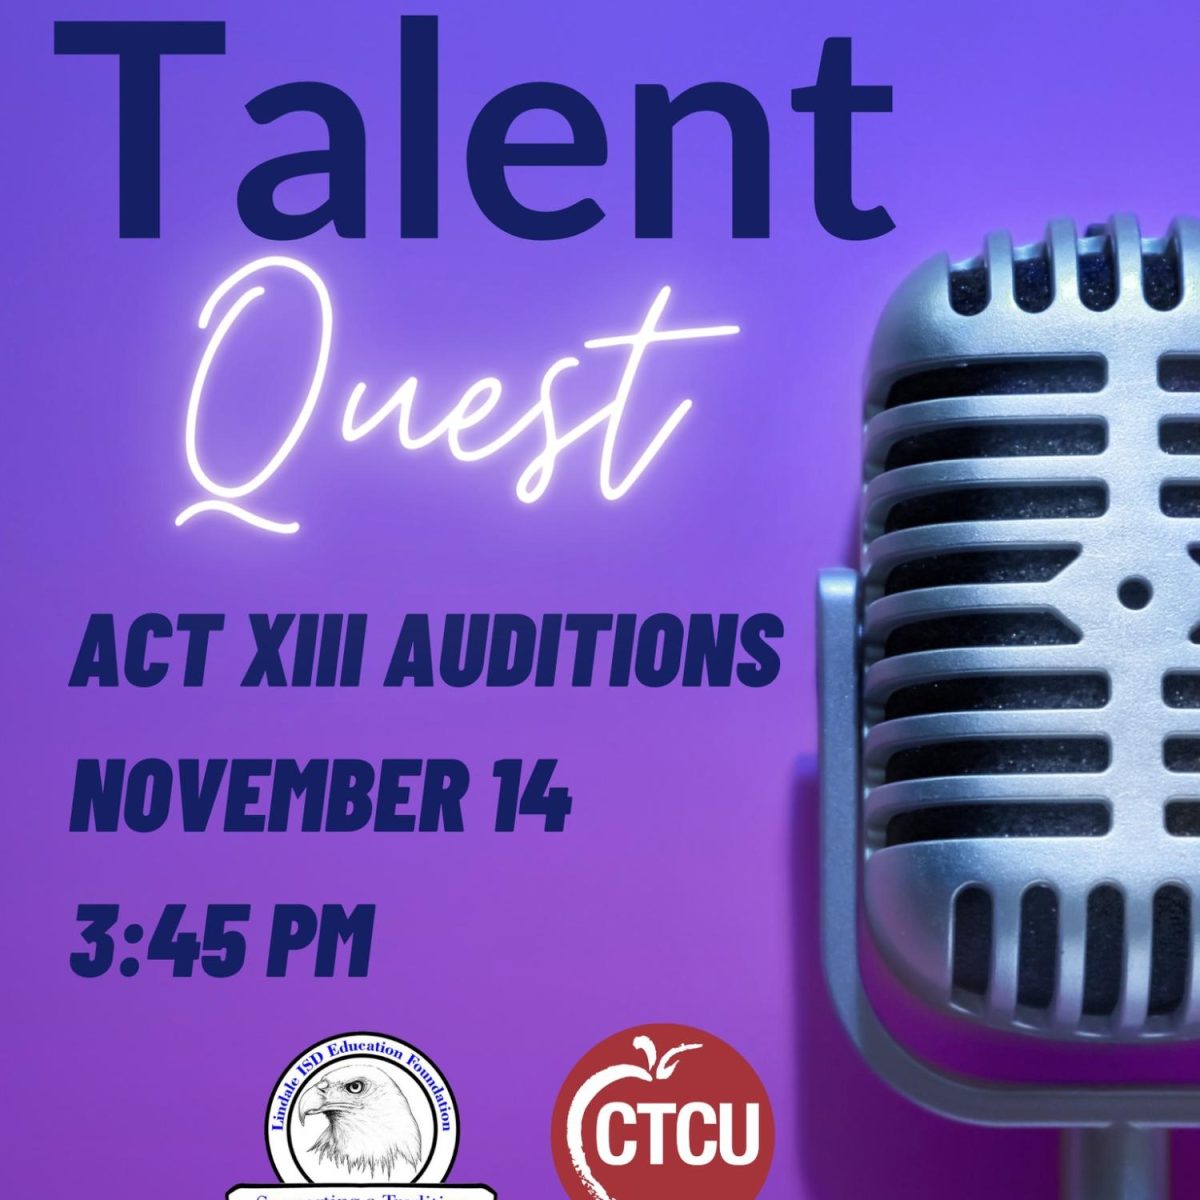 Talent show auditions to be held next week. They will be held in the Performing Arts Center.